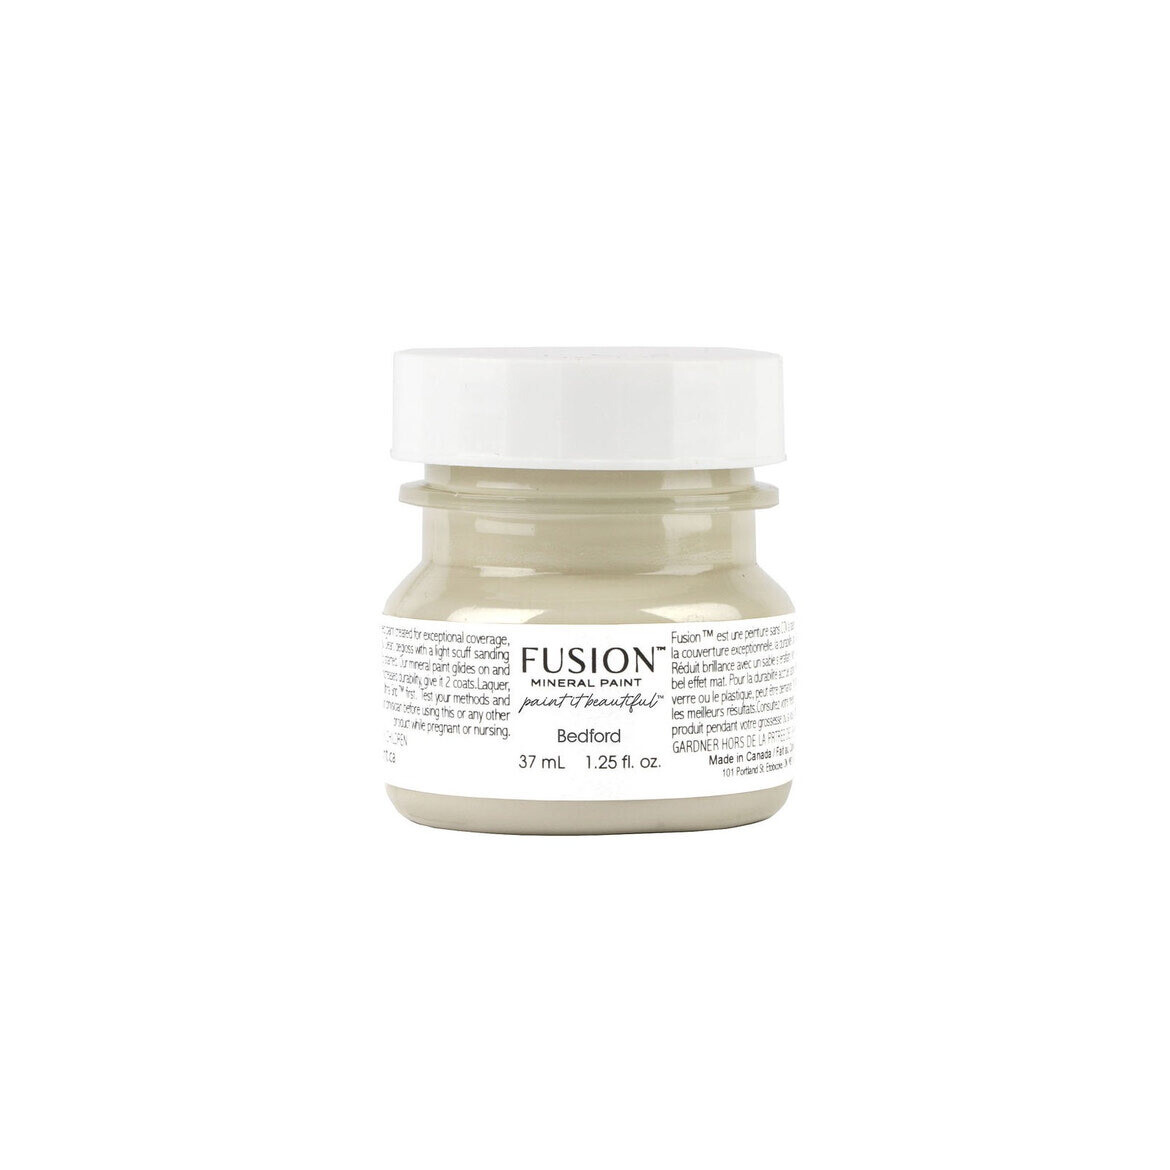 Fusion Mineral Paint - Bedford (Tester)